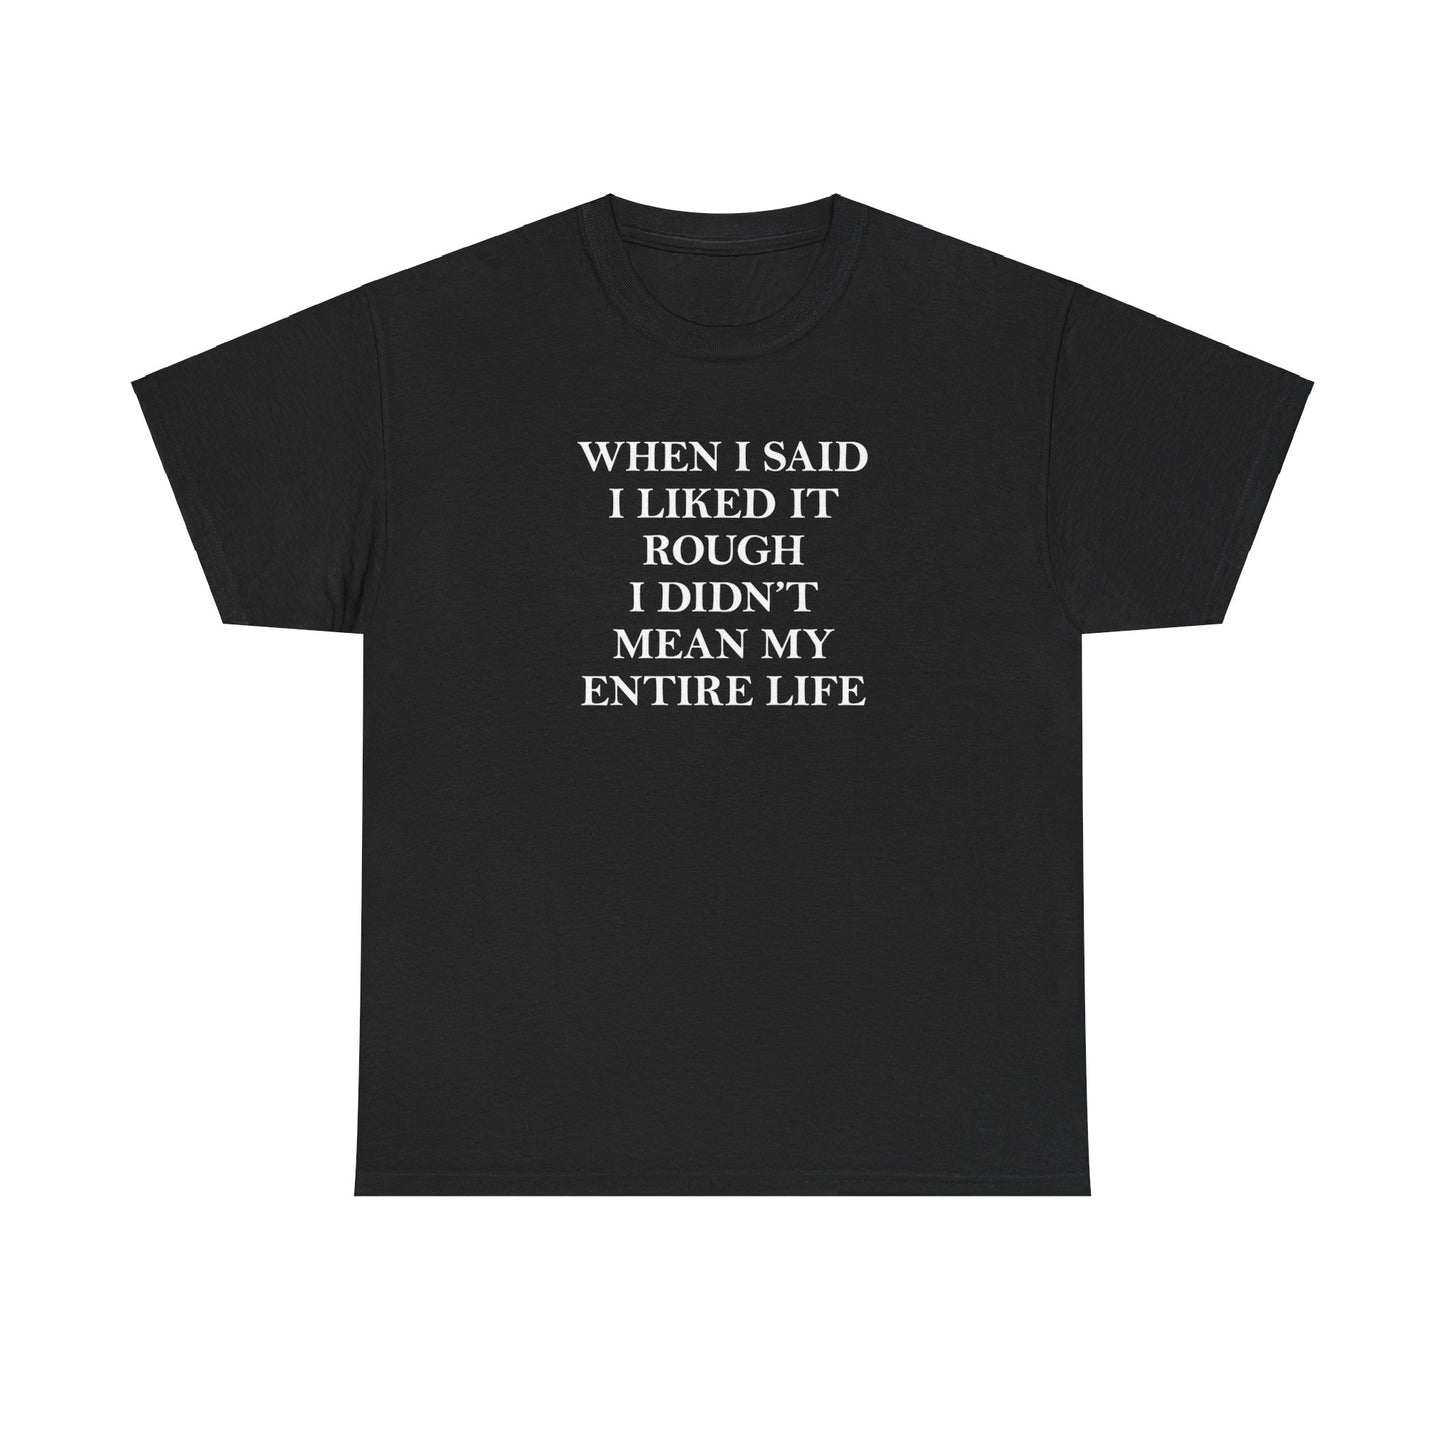 WHEN I SAID I LIKED IT ROUGH I DIDN'T MEAN MY ENTIRE LIFE T-SHIRT